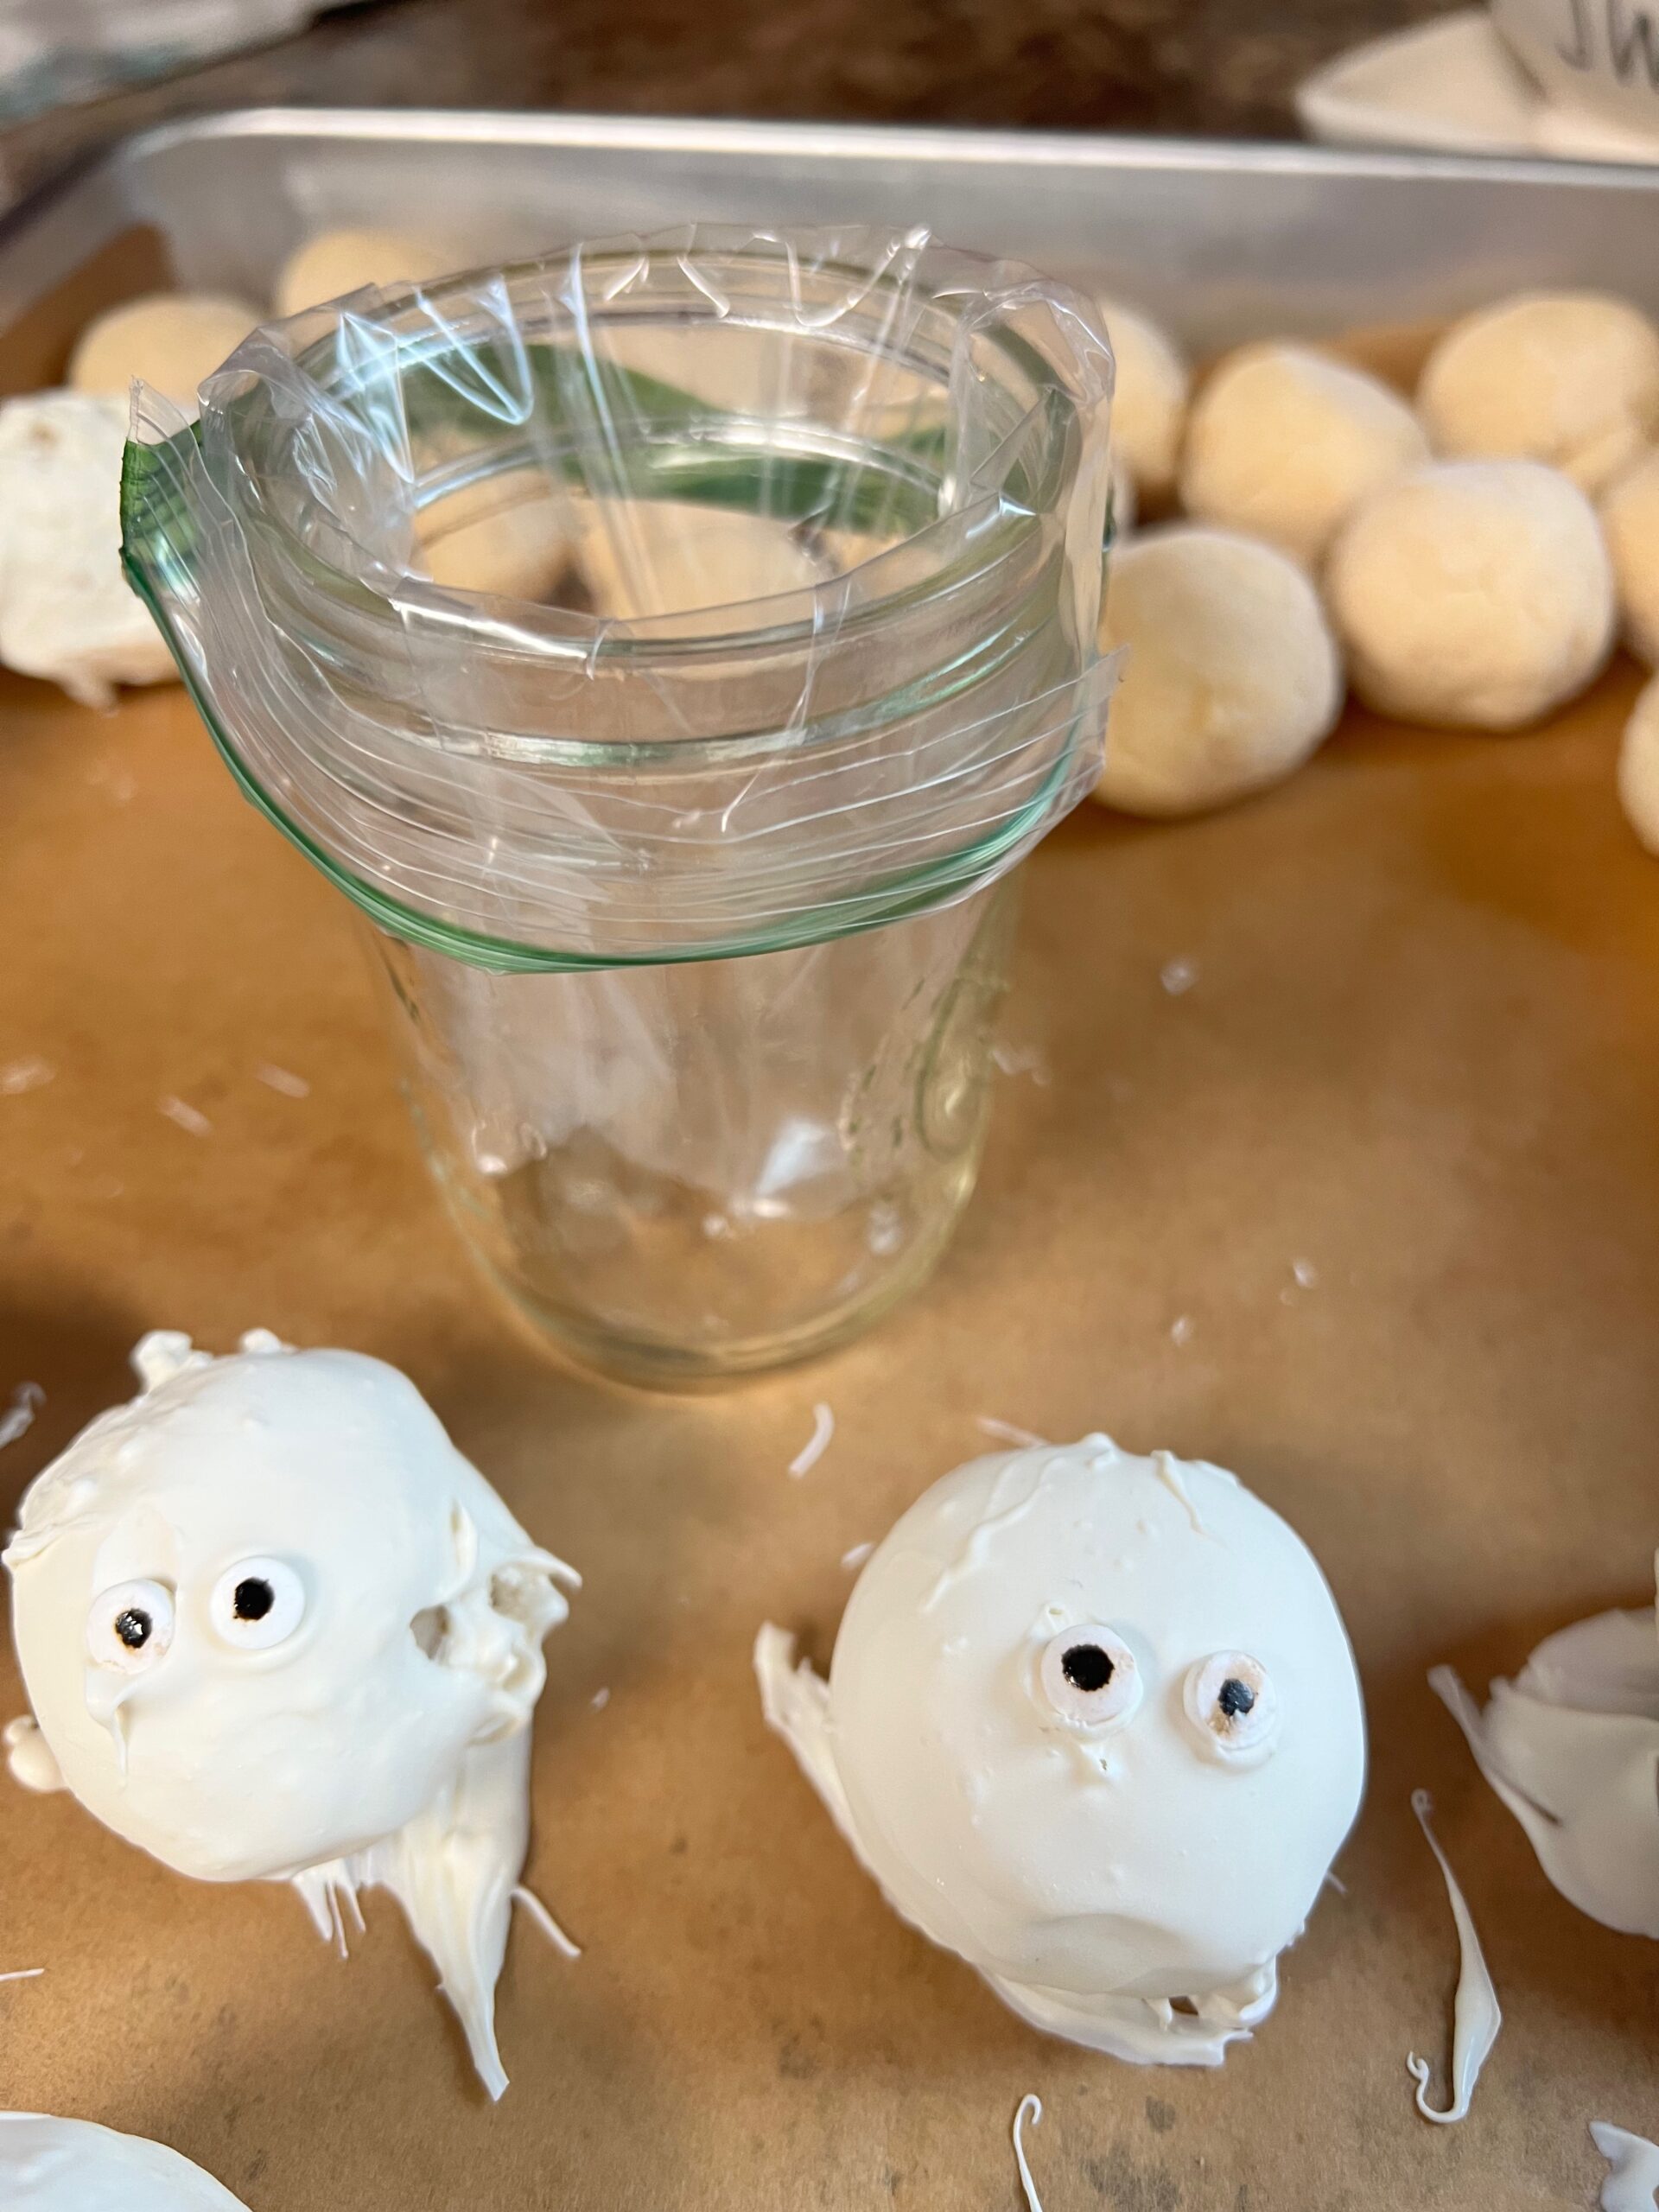 mummy cake balls with first layer of almond bark and eyeballs and jar with small zipper bag